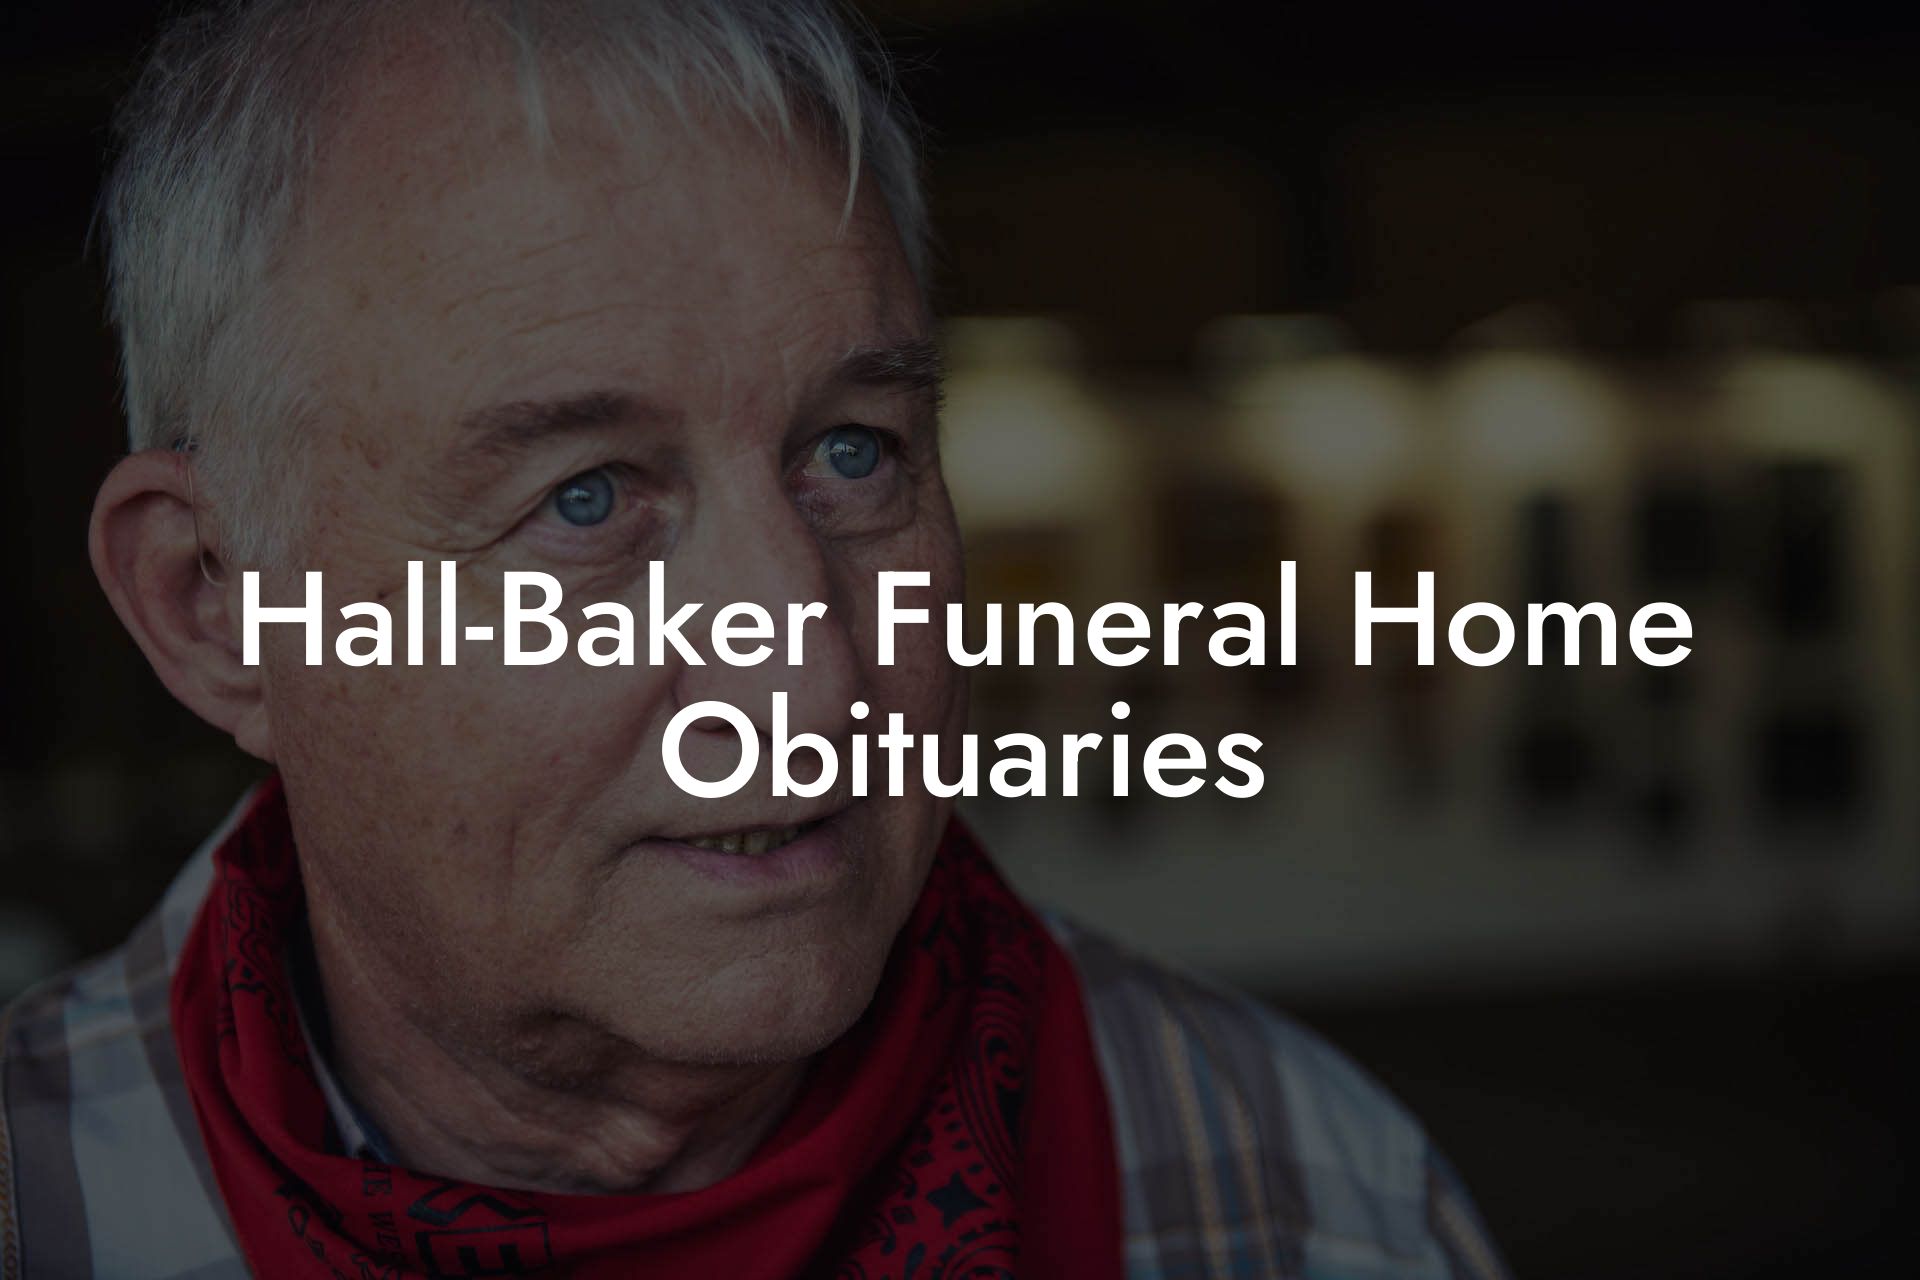 Hall-Baker Funeral Home Obituaries